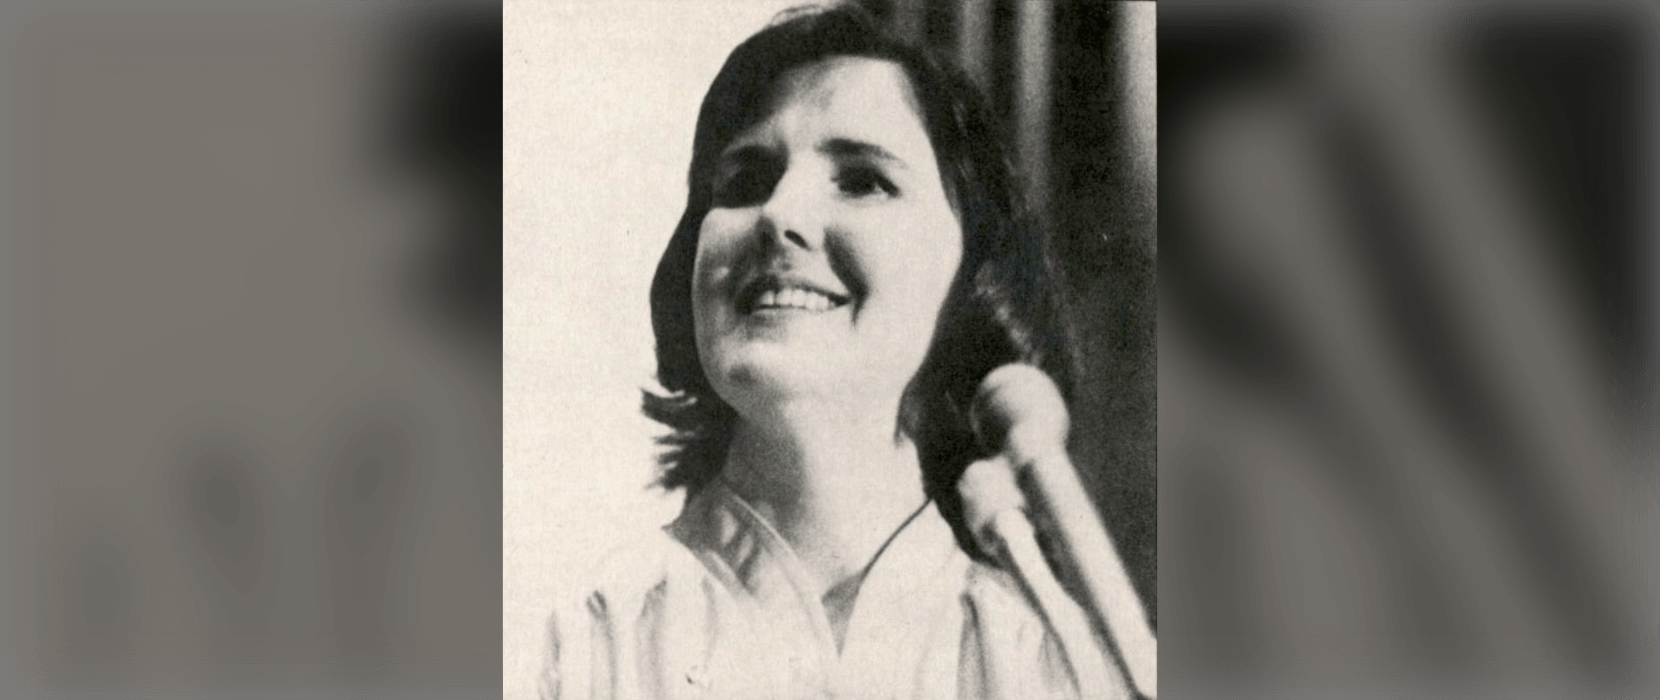 Black and white photo of a woman smiling